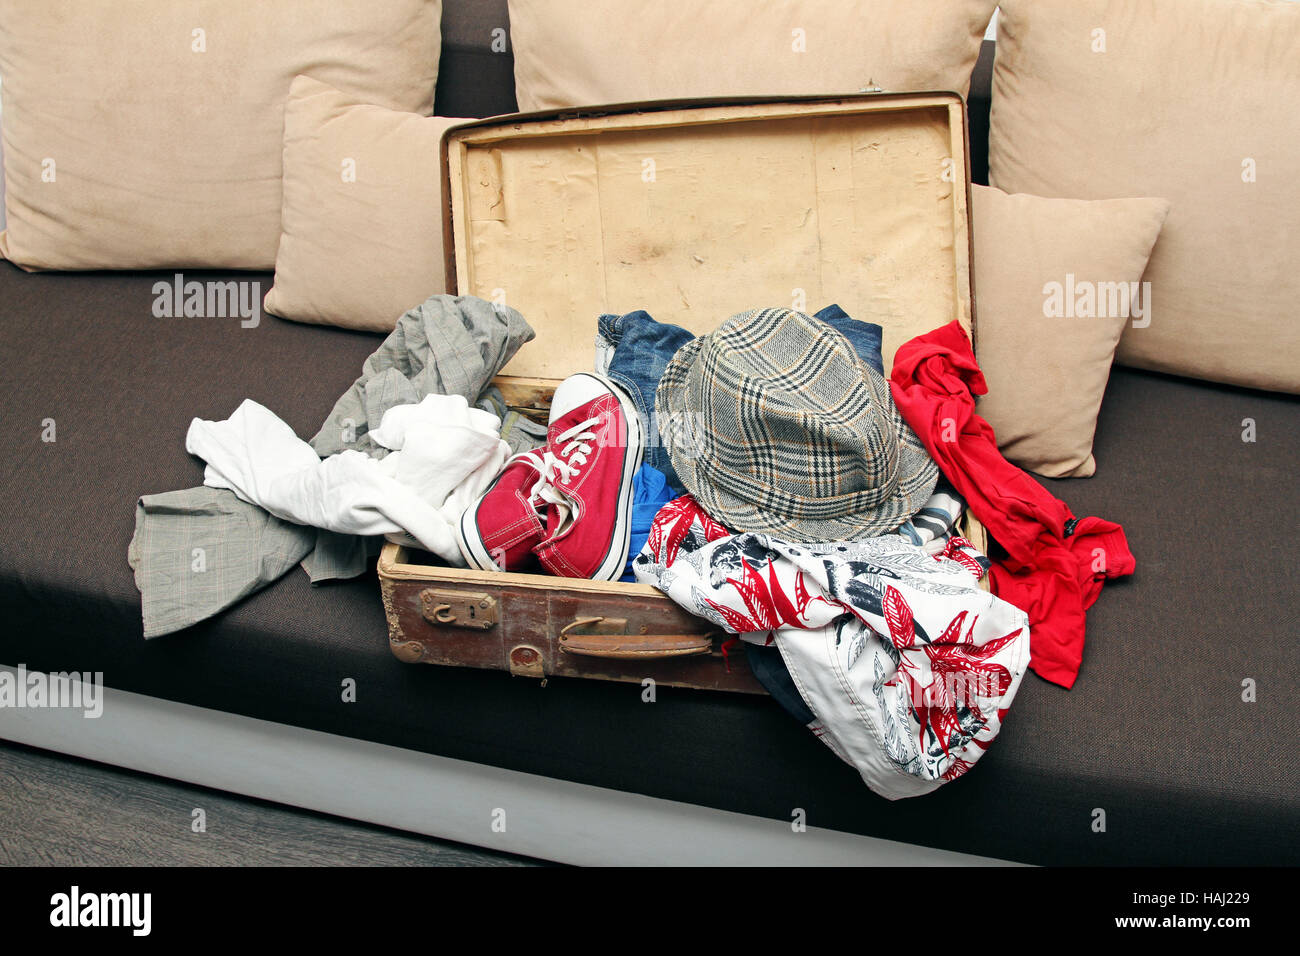 opened suitcase full with clothes on couch Stock Photo